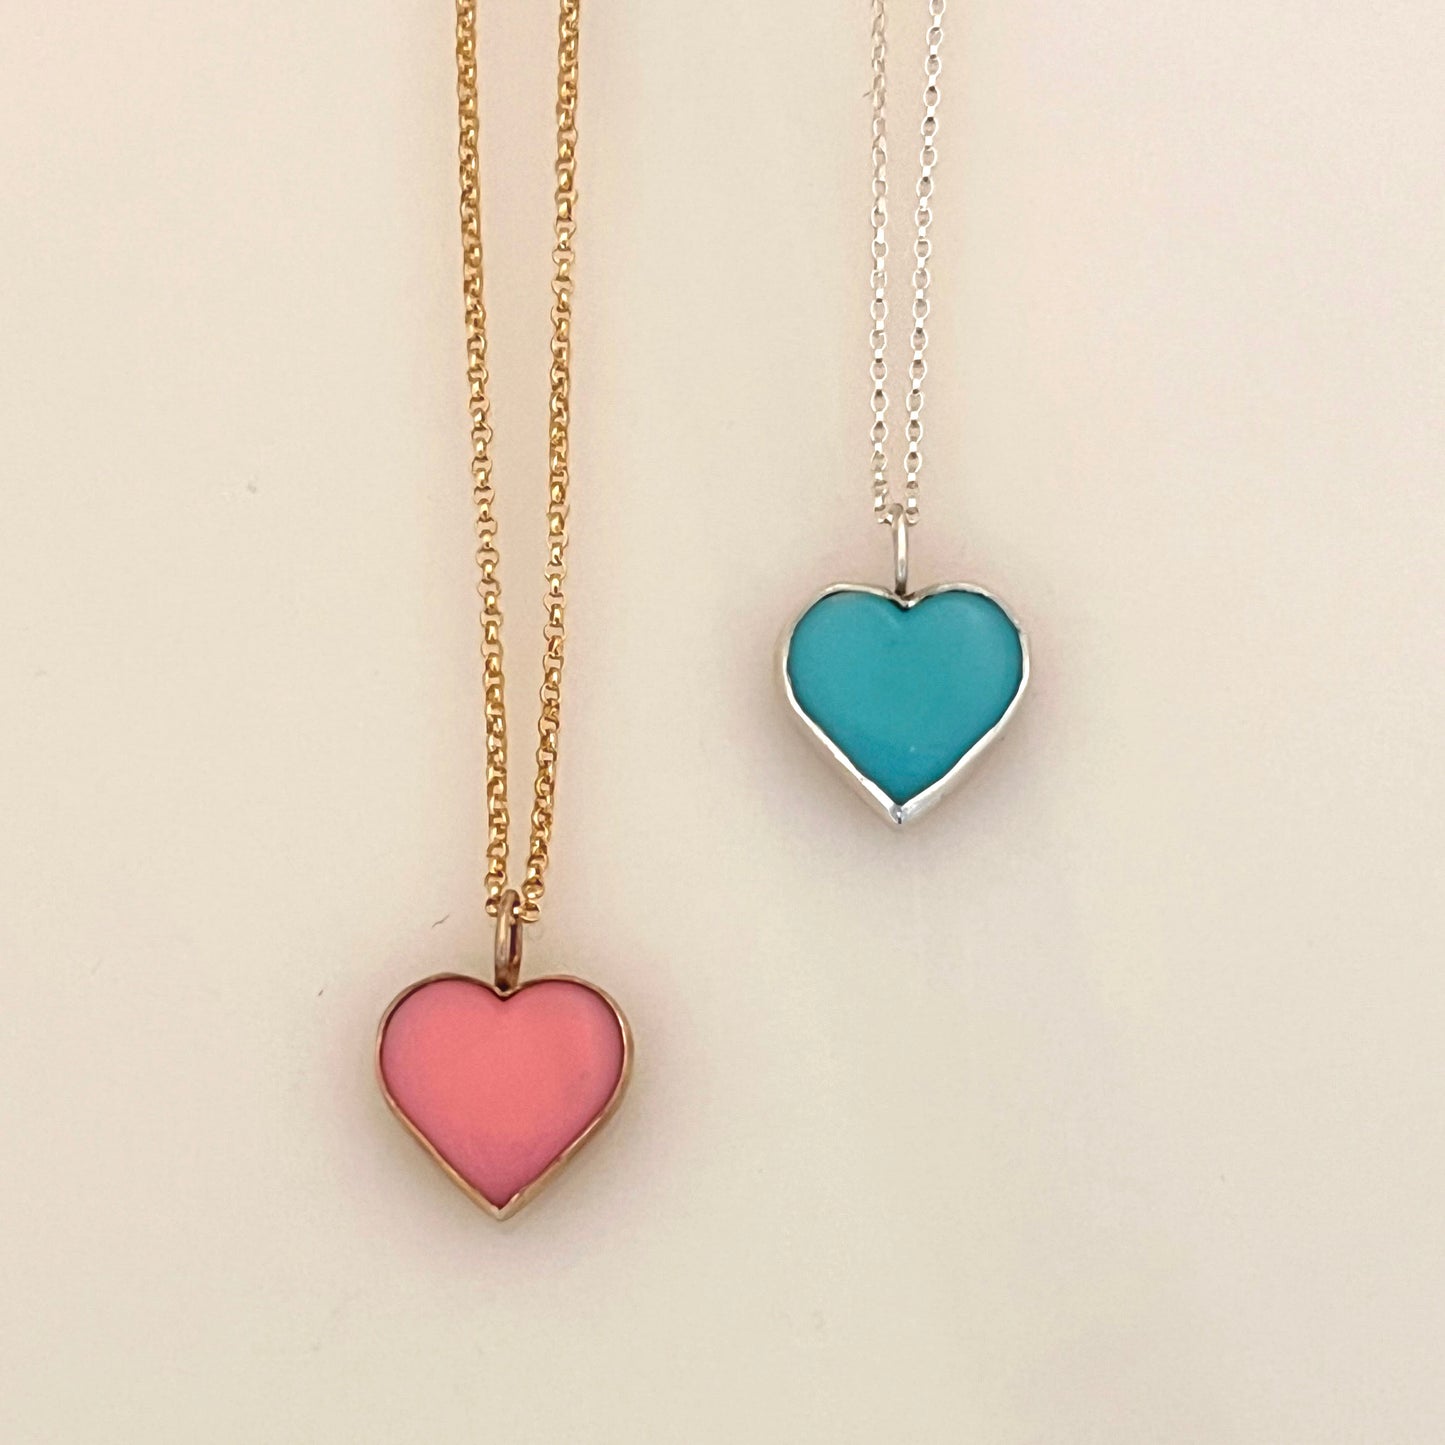 Teal Candy Heart Necklace